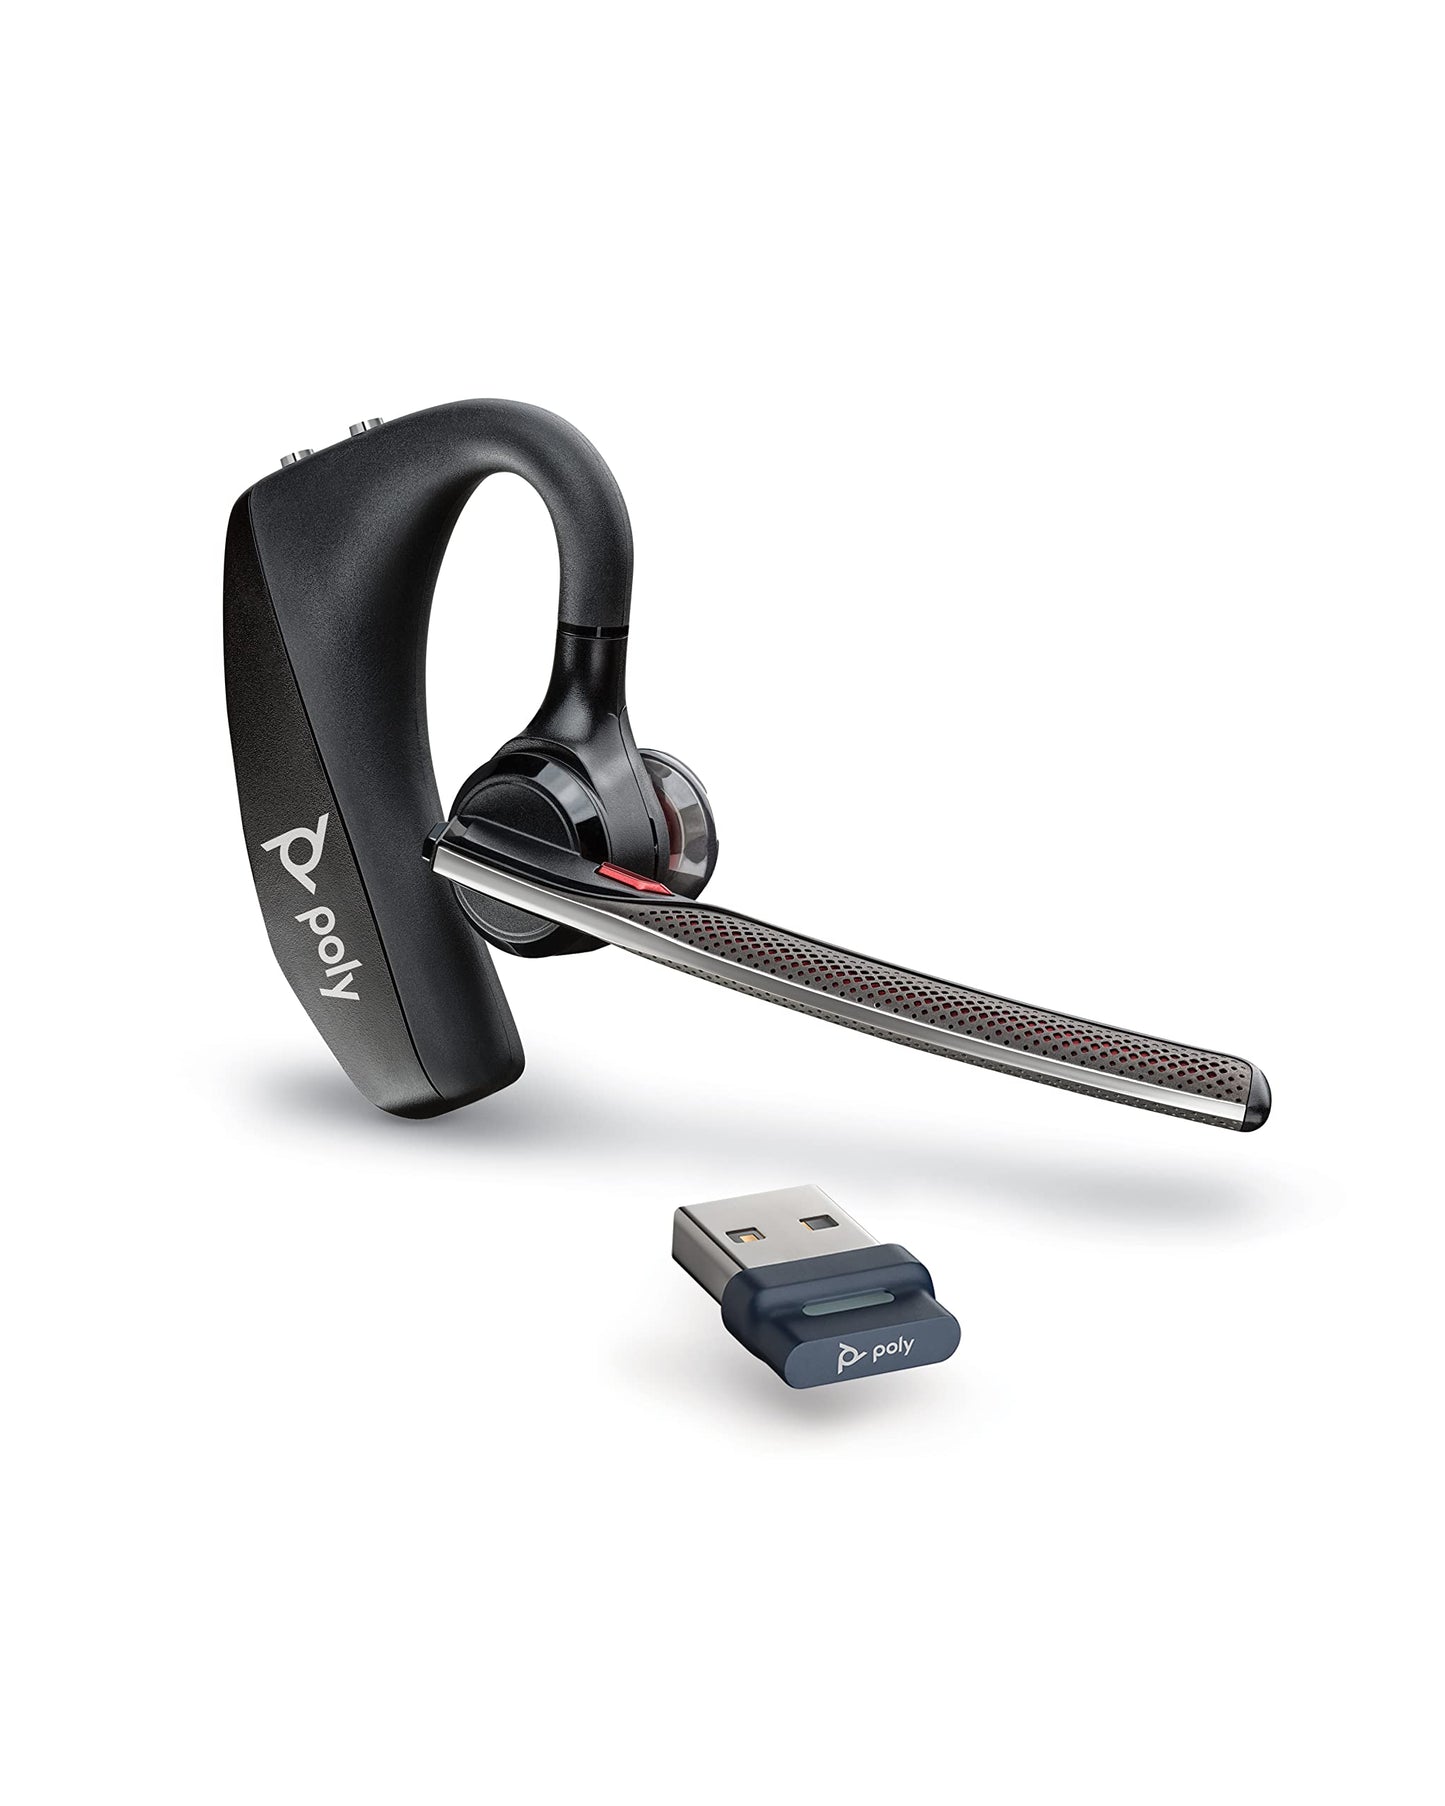 Poly Voyager 5200 UC Wireless Headset & Charging Case - Single-Ear Bluetooth Headset w/Noise-Canceling Mic - Connect to Mobile/PC via Bluetooth -Works w/Microsoft Teams, Zoom & More, Plantronics